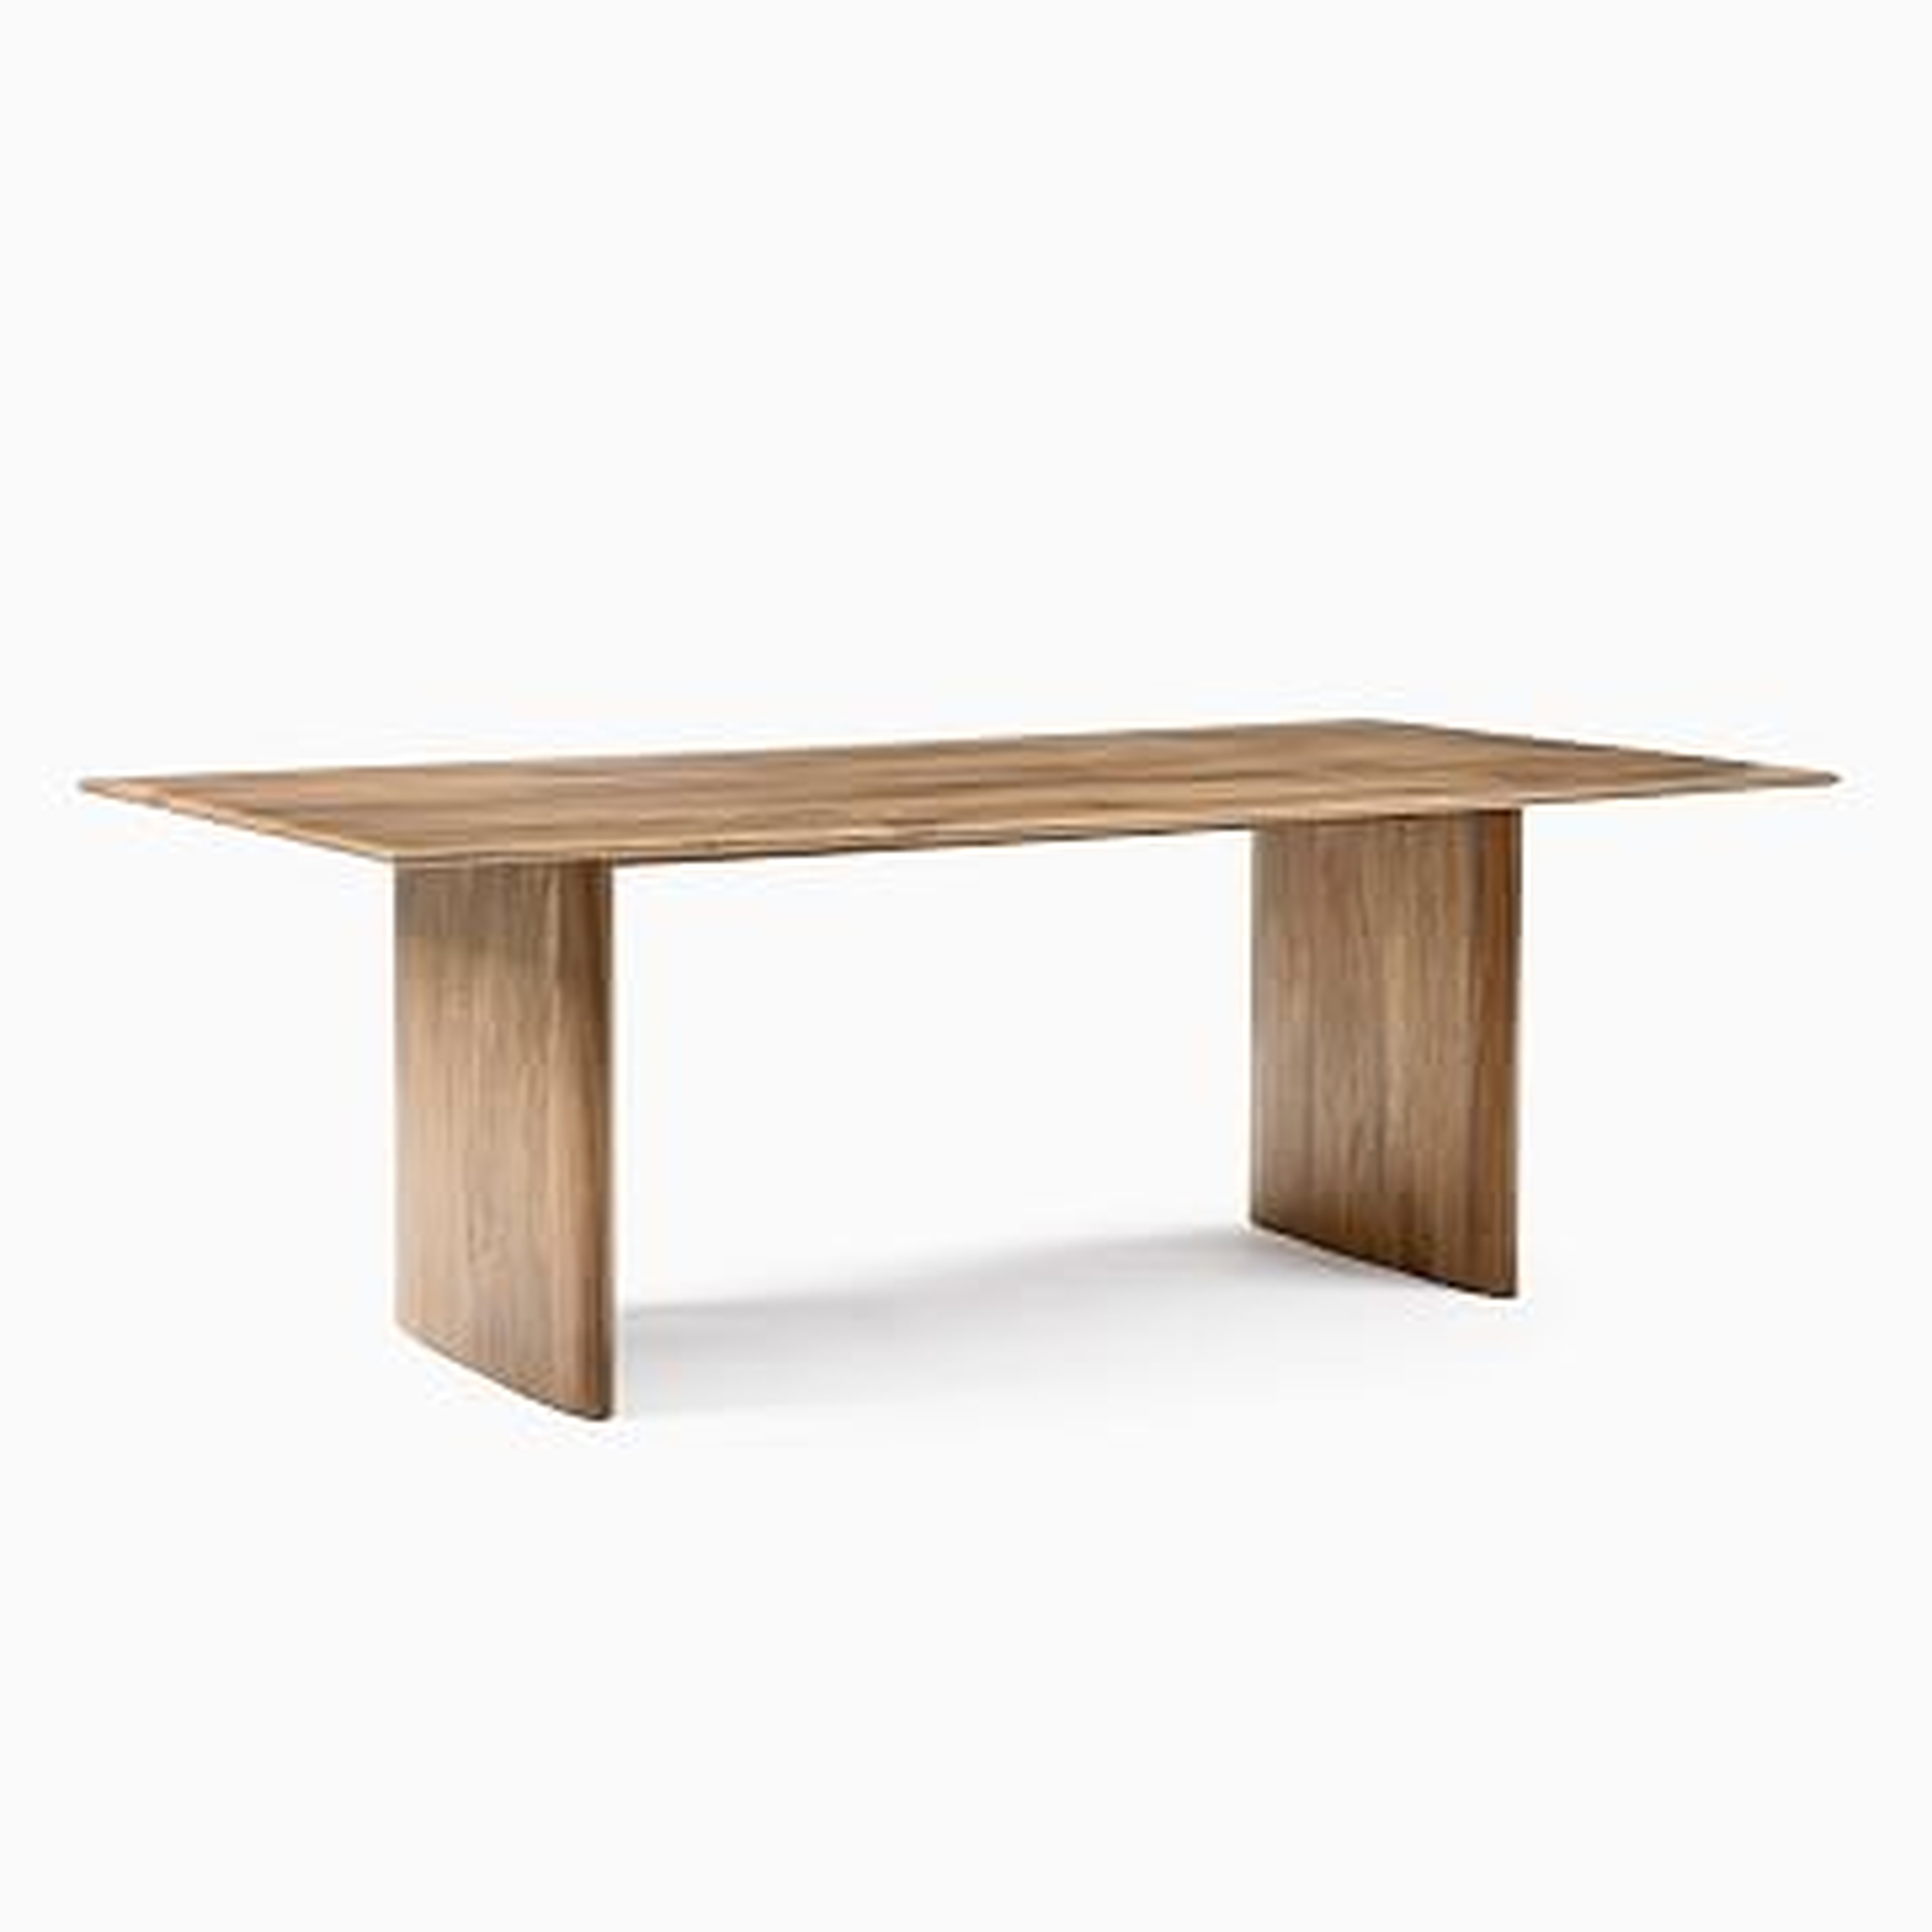 Extra Wide Anton Dining Table, Burnt Wax - West Elm